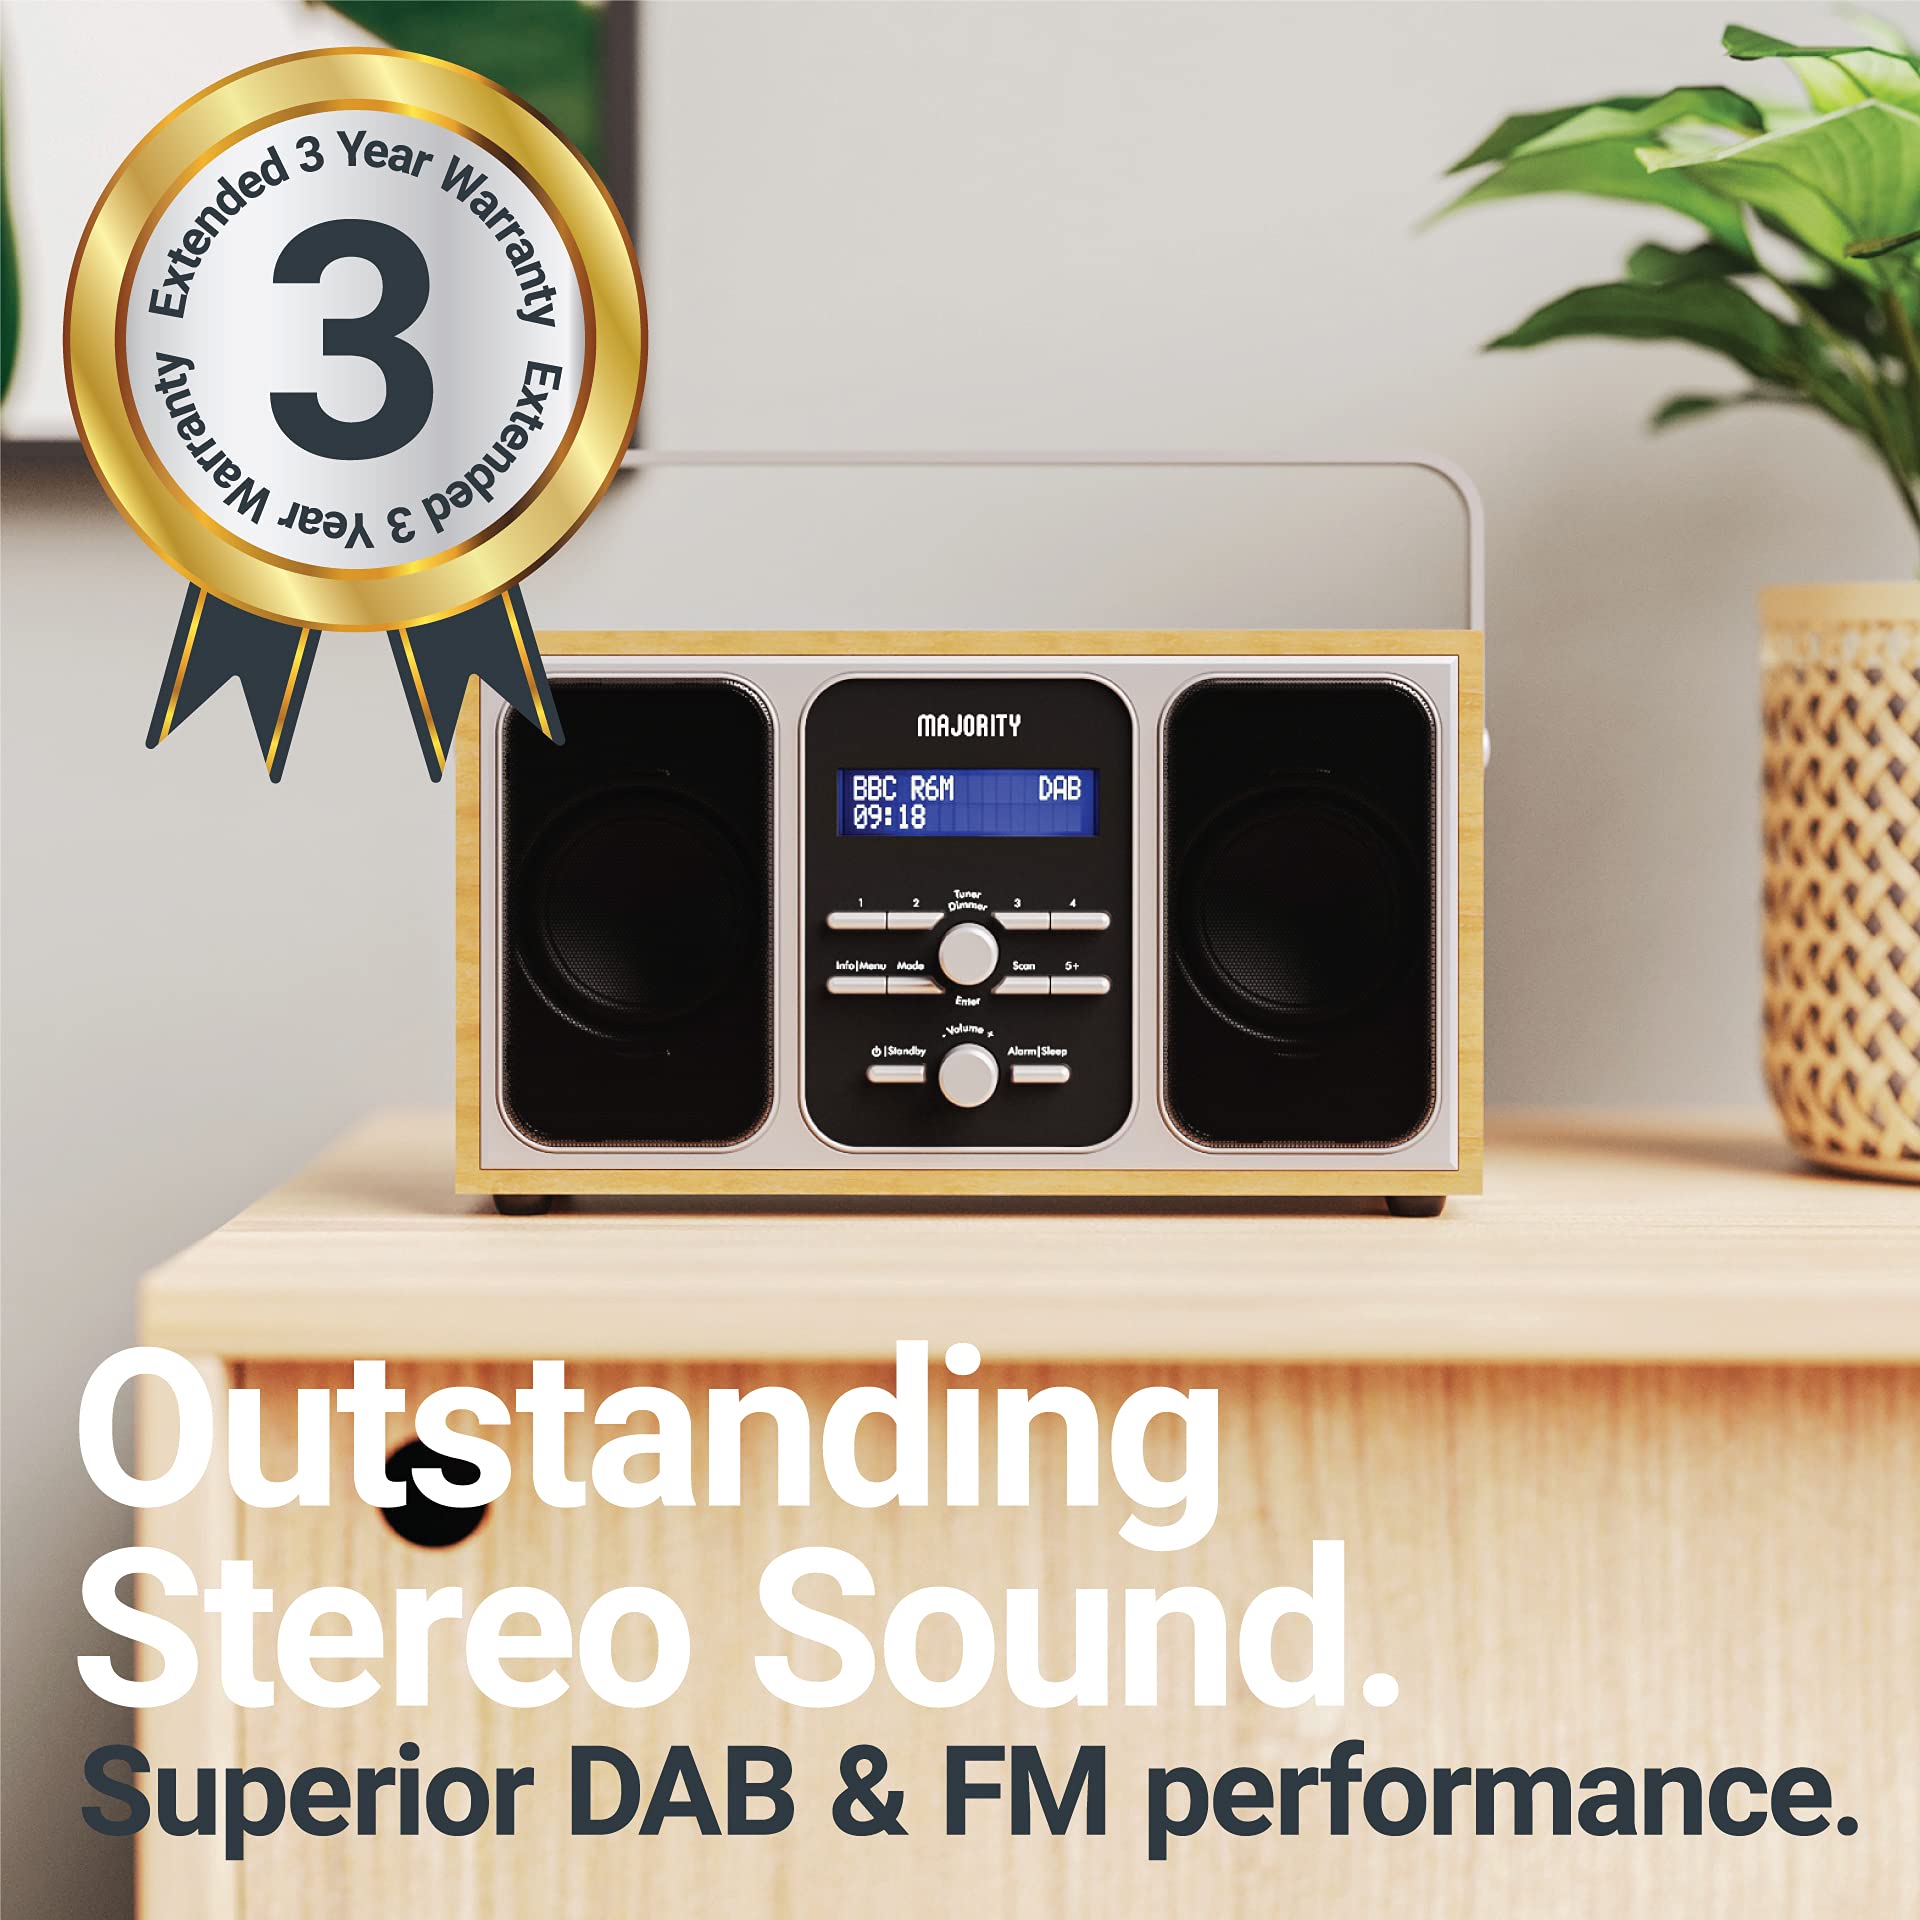 DAB, DAB+ Digital Radio with FM | Mains Powered and Portable with 15 Hours of Playback and Stereo Speakers | Majority Girton 2 Portable DAB Radio | LED Screen with Dual Alarm and 20 Pre-sets | Oak